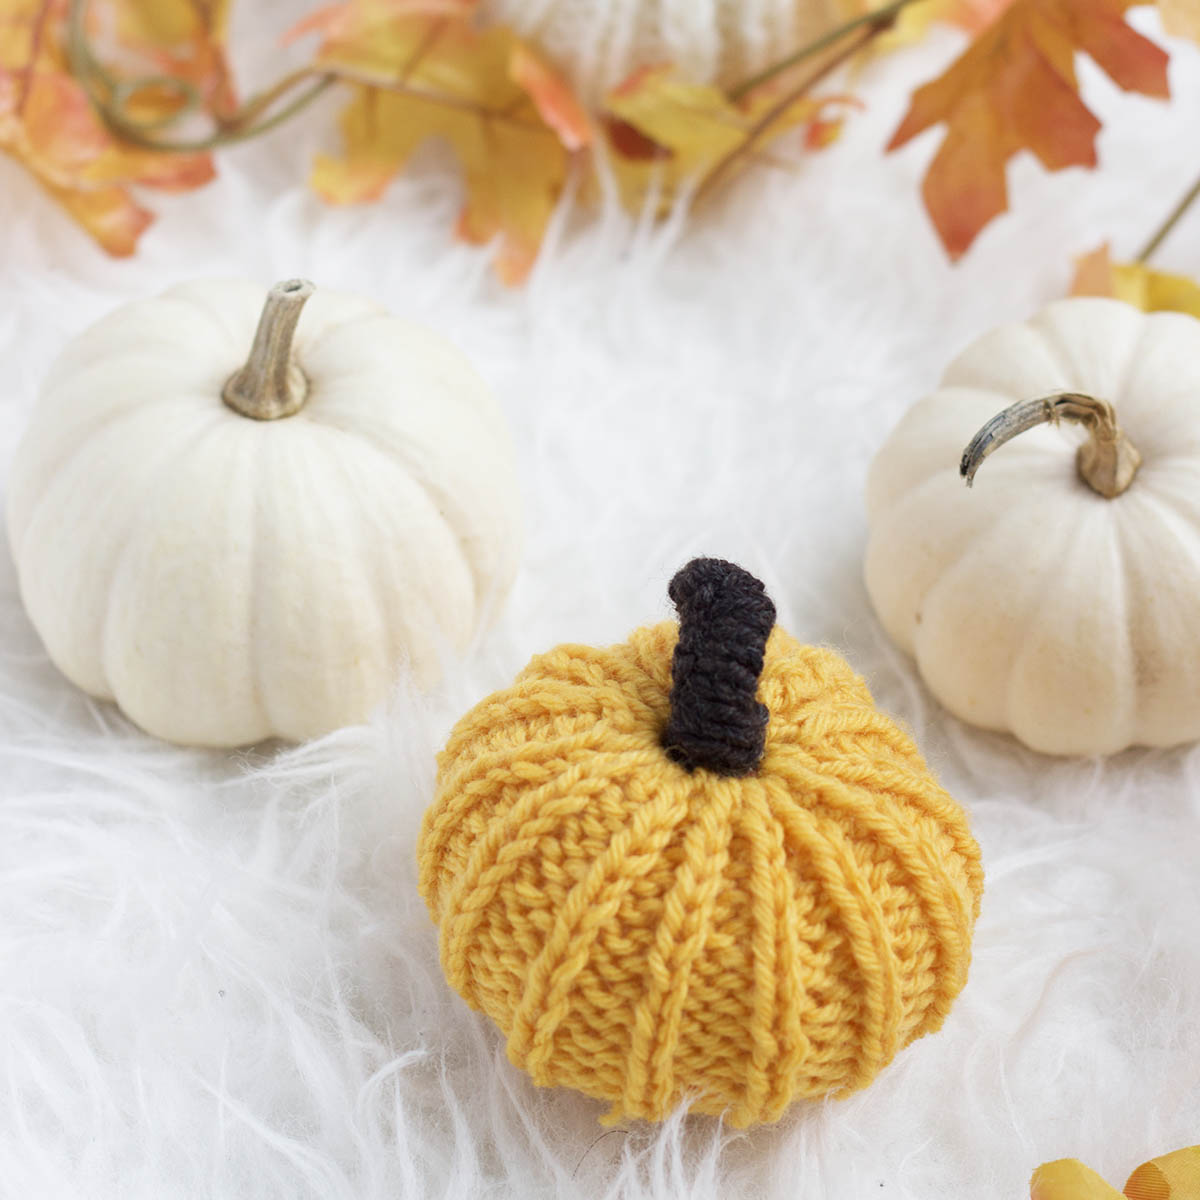 How to Knit Pumpkins